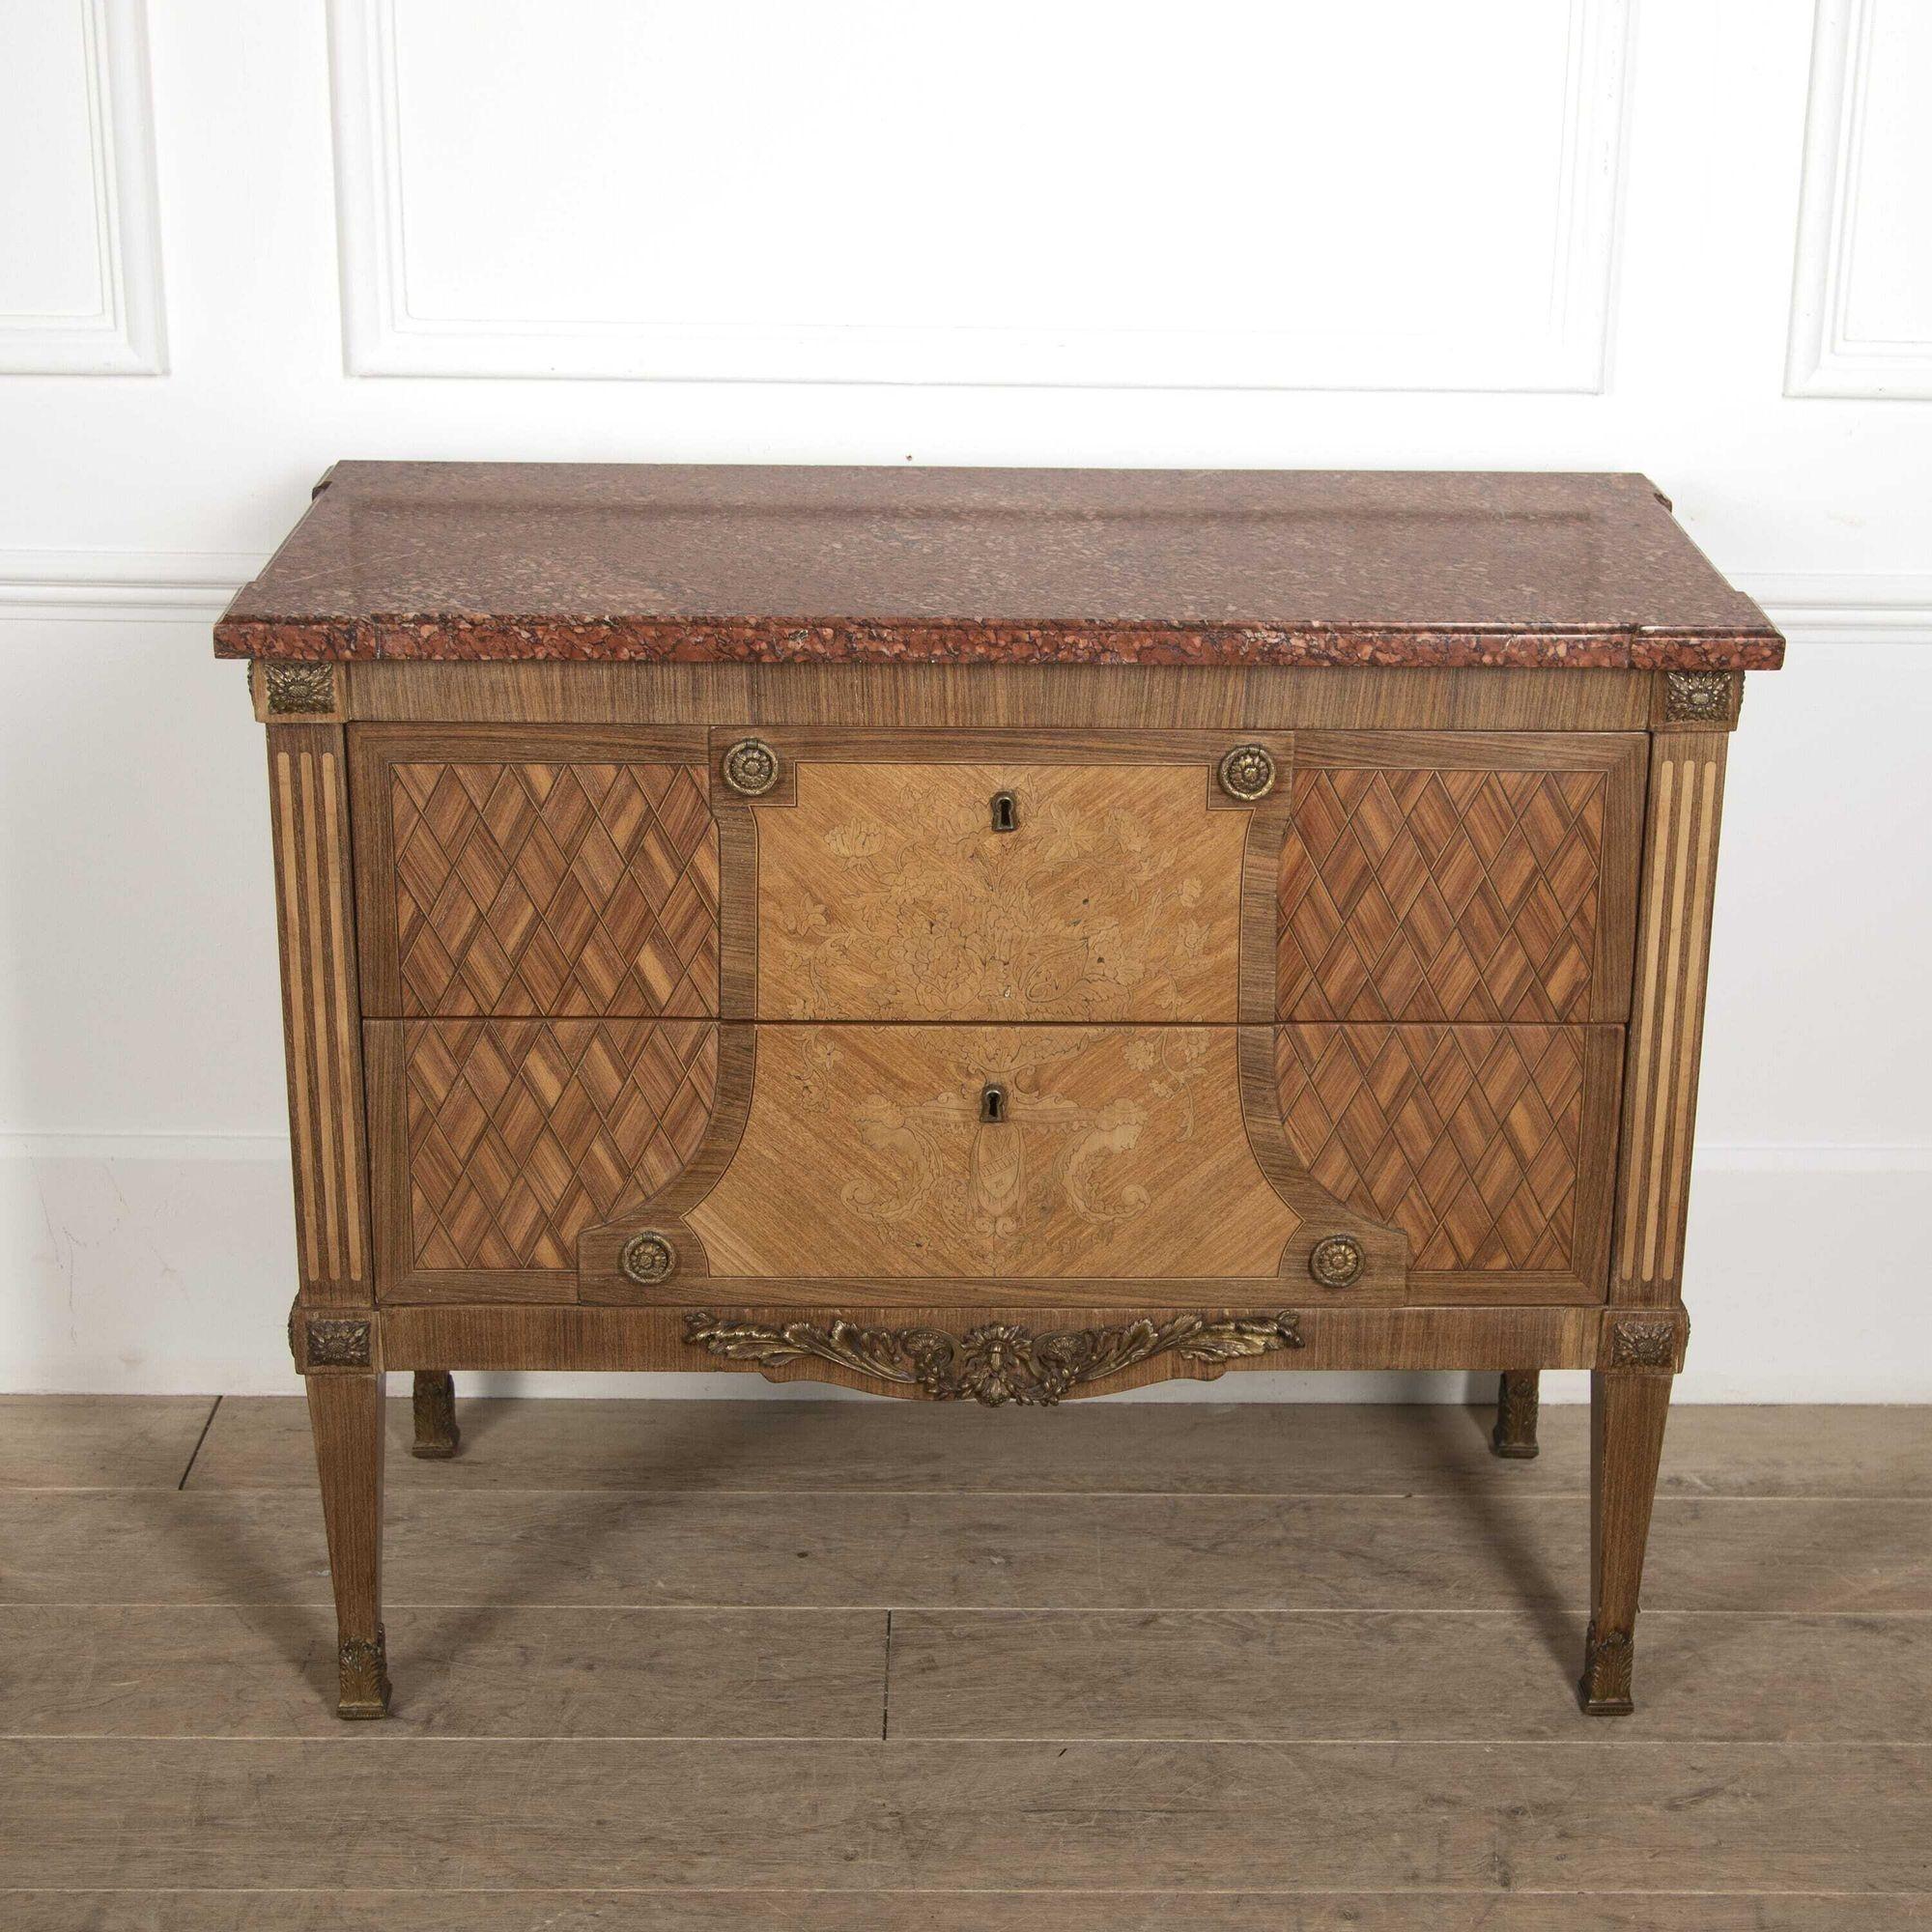 French 19th century Marquetry two-drawer commode with a wonderful marble top.
Featuring wonderful inlaid decoration, this commode conveys typical Empire styles. 
A great storage piece to add to a bedroom or dressing room setting.